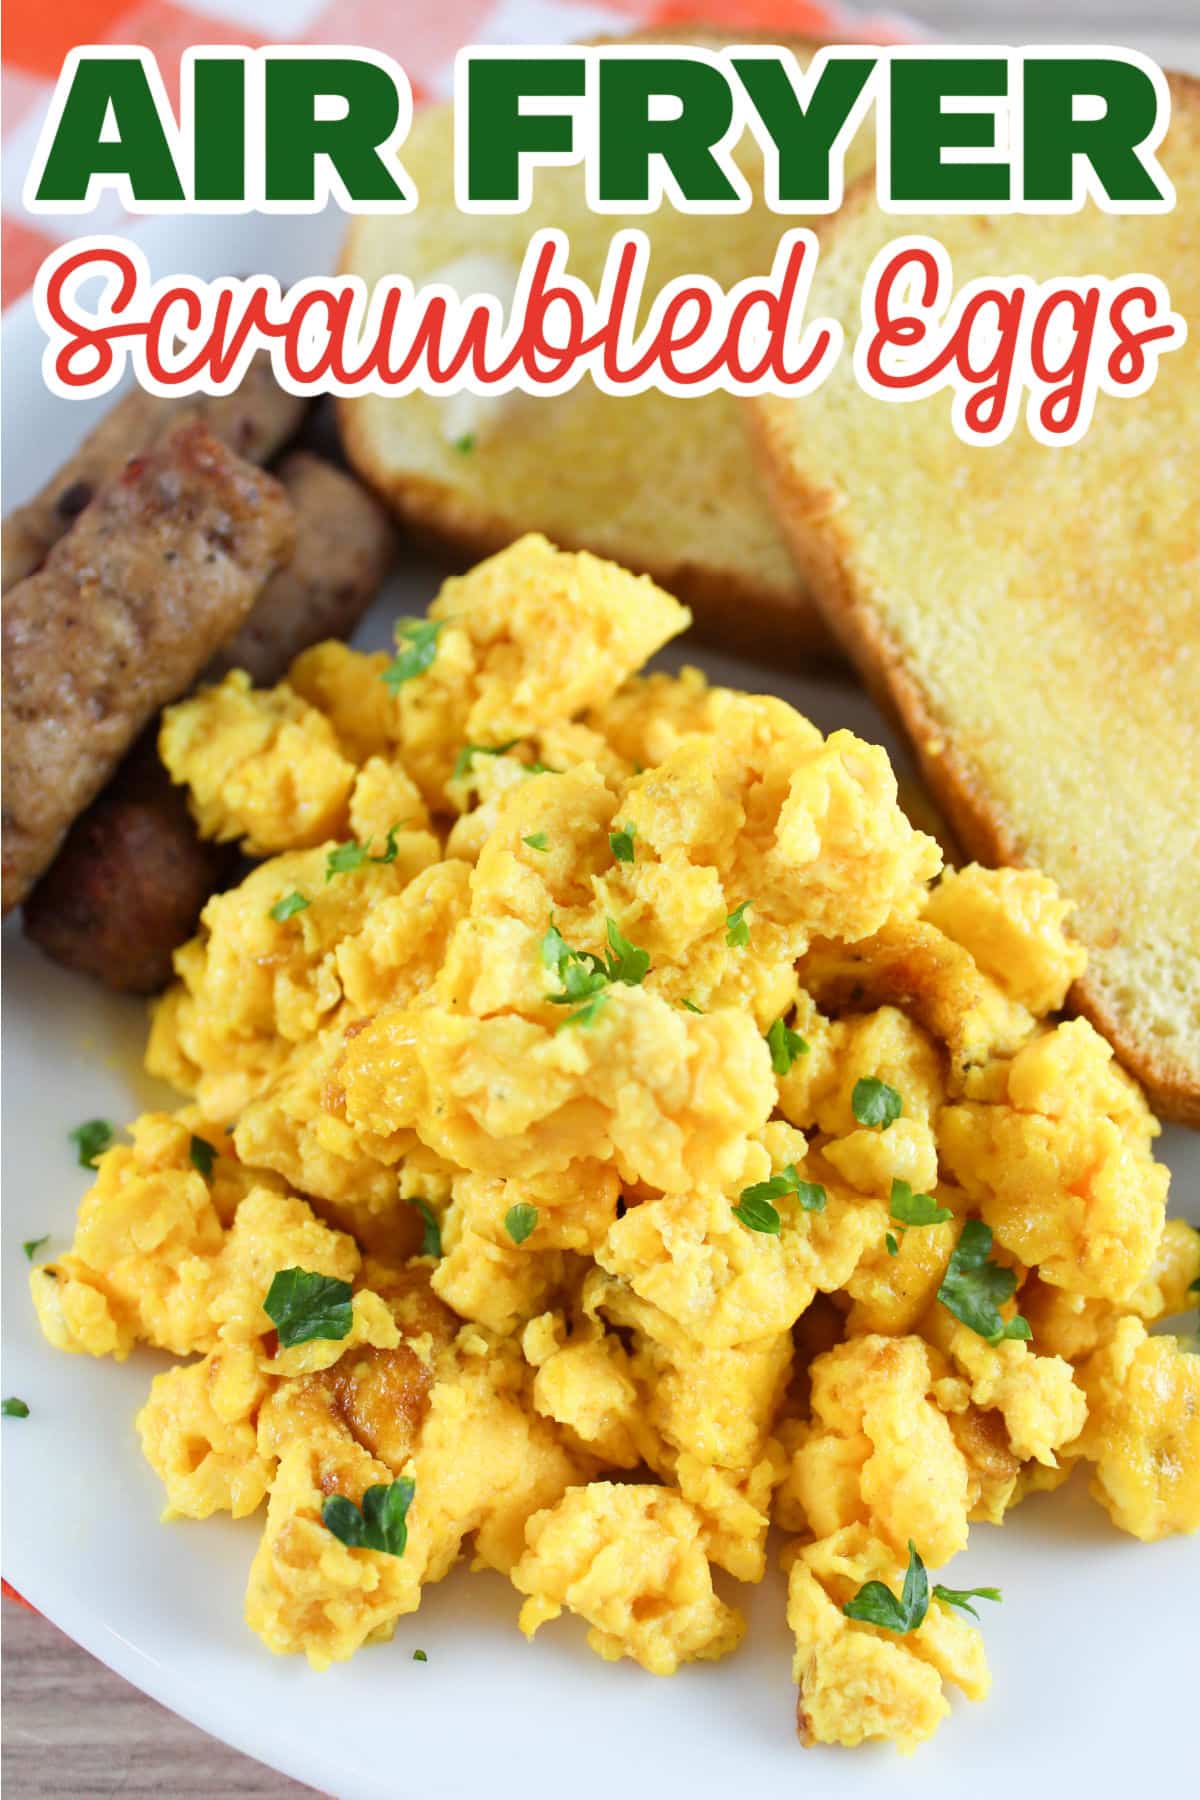 Air Fryer Scrambled Eggs can be just as light and fluffy as ones made on the stove top! You'll love how easy these are to make - even the kids can do it!  via @foodhussy